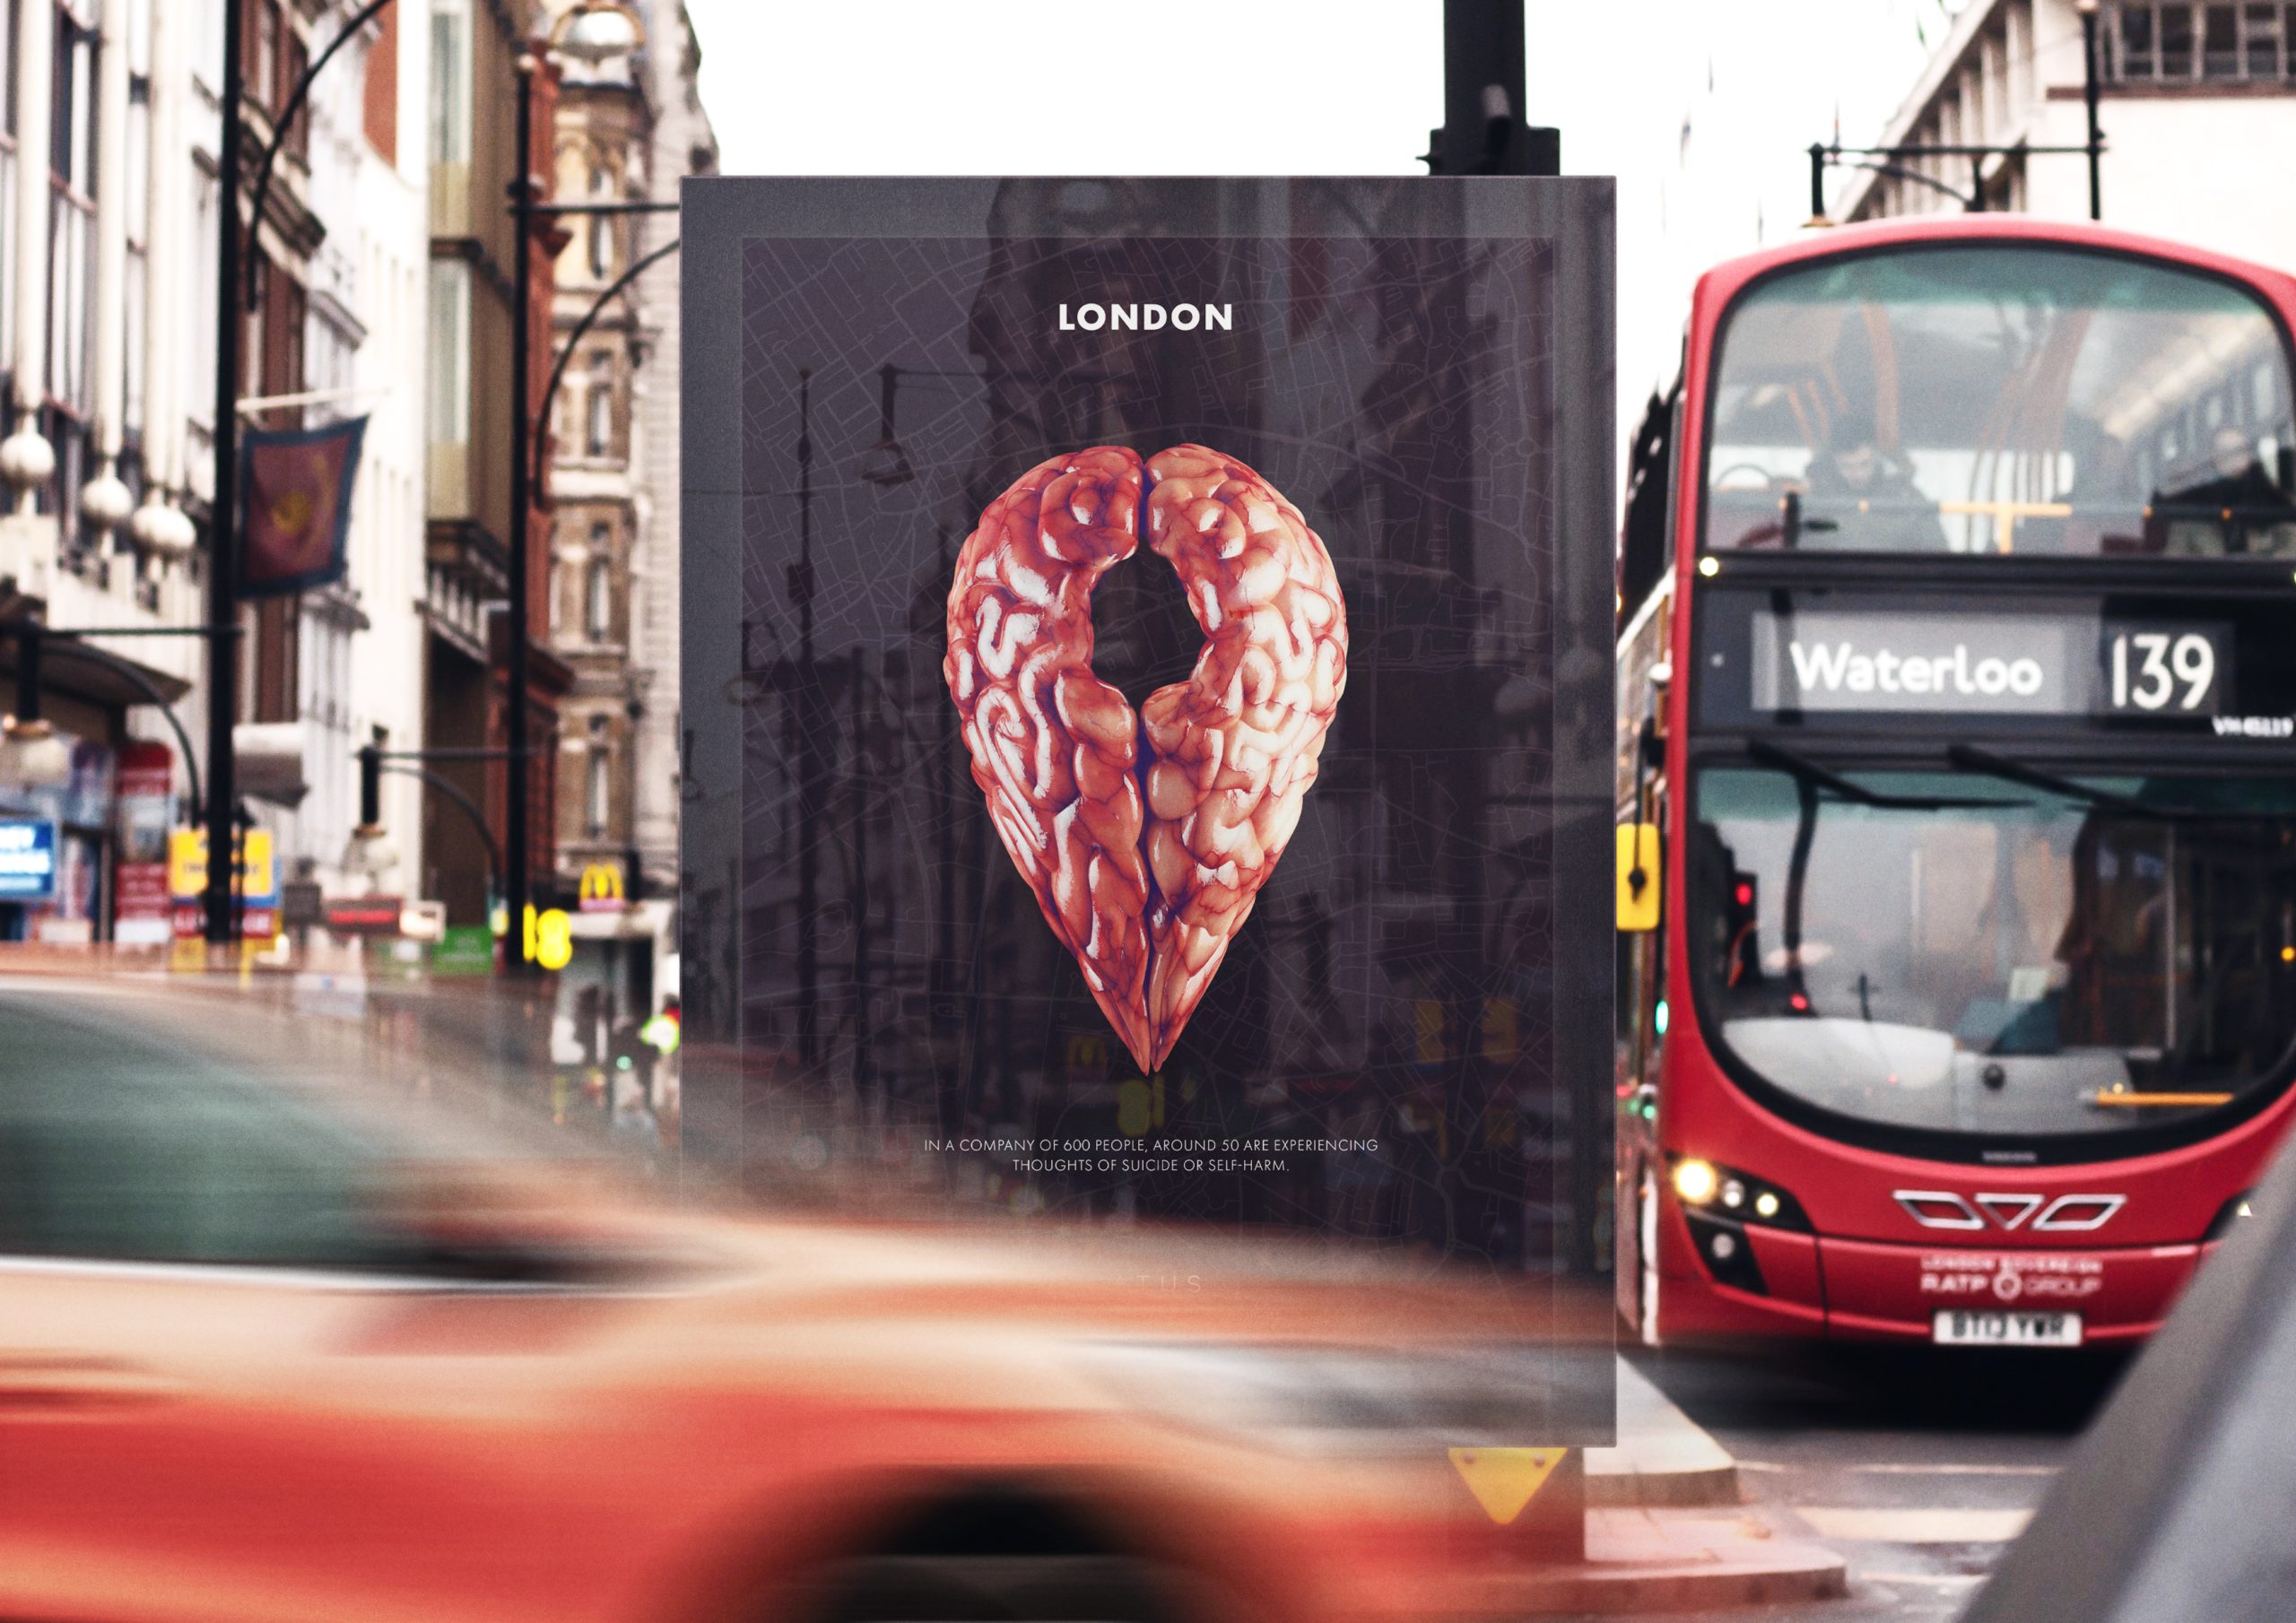 Hard hitting campaign puts a focus on employee wellbeing in cities across the UK